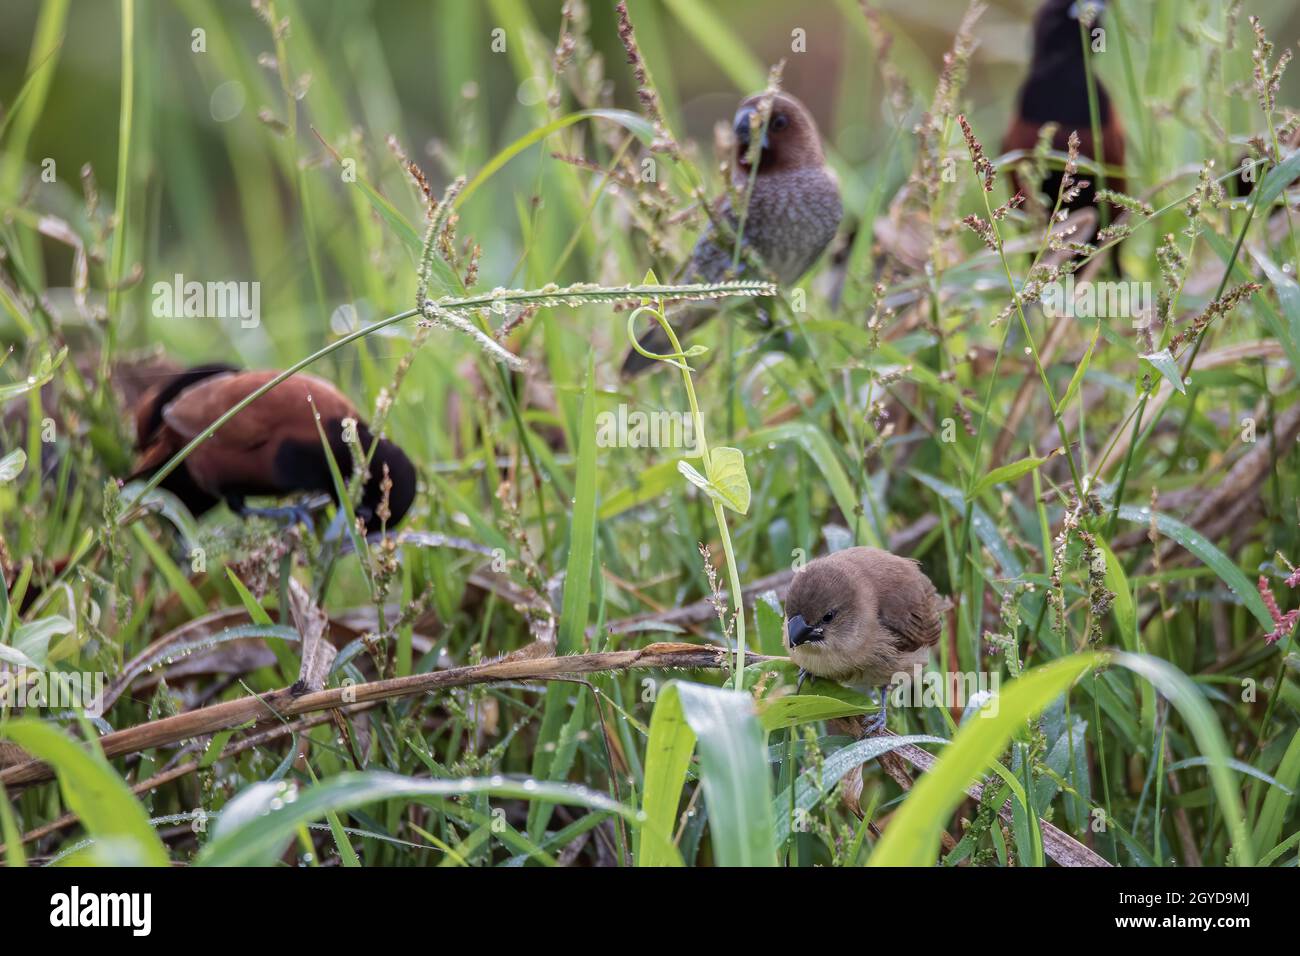 Group of various types of birds pipits standing on grass at paddy field Stock Photo